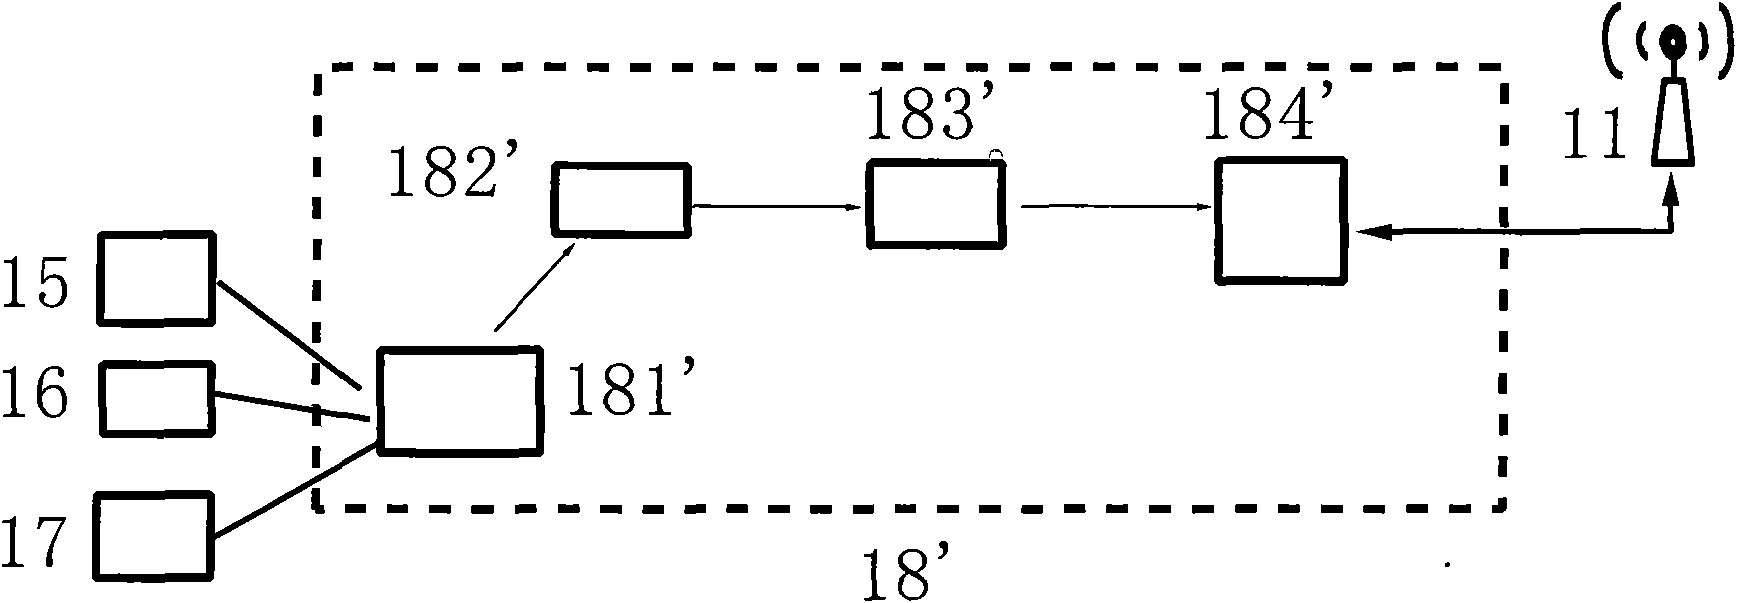 Monitoring and processing system for operating environment of electrical equipment